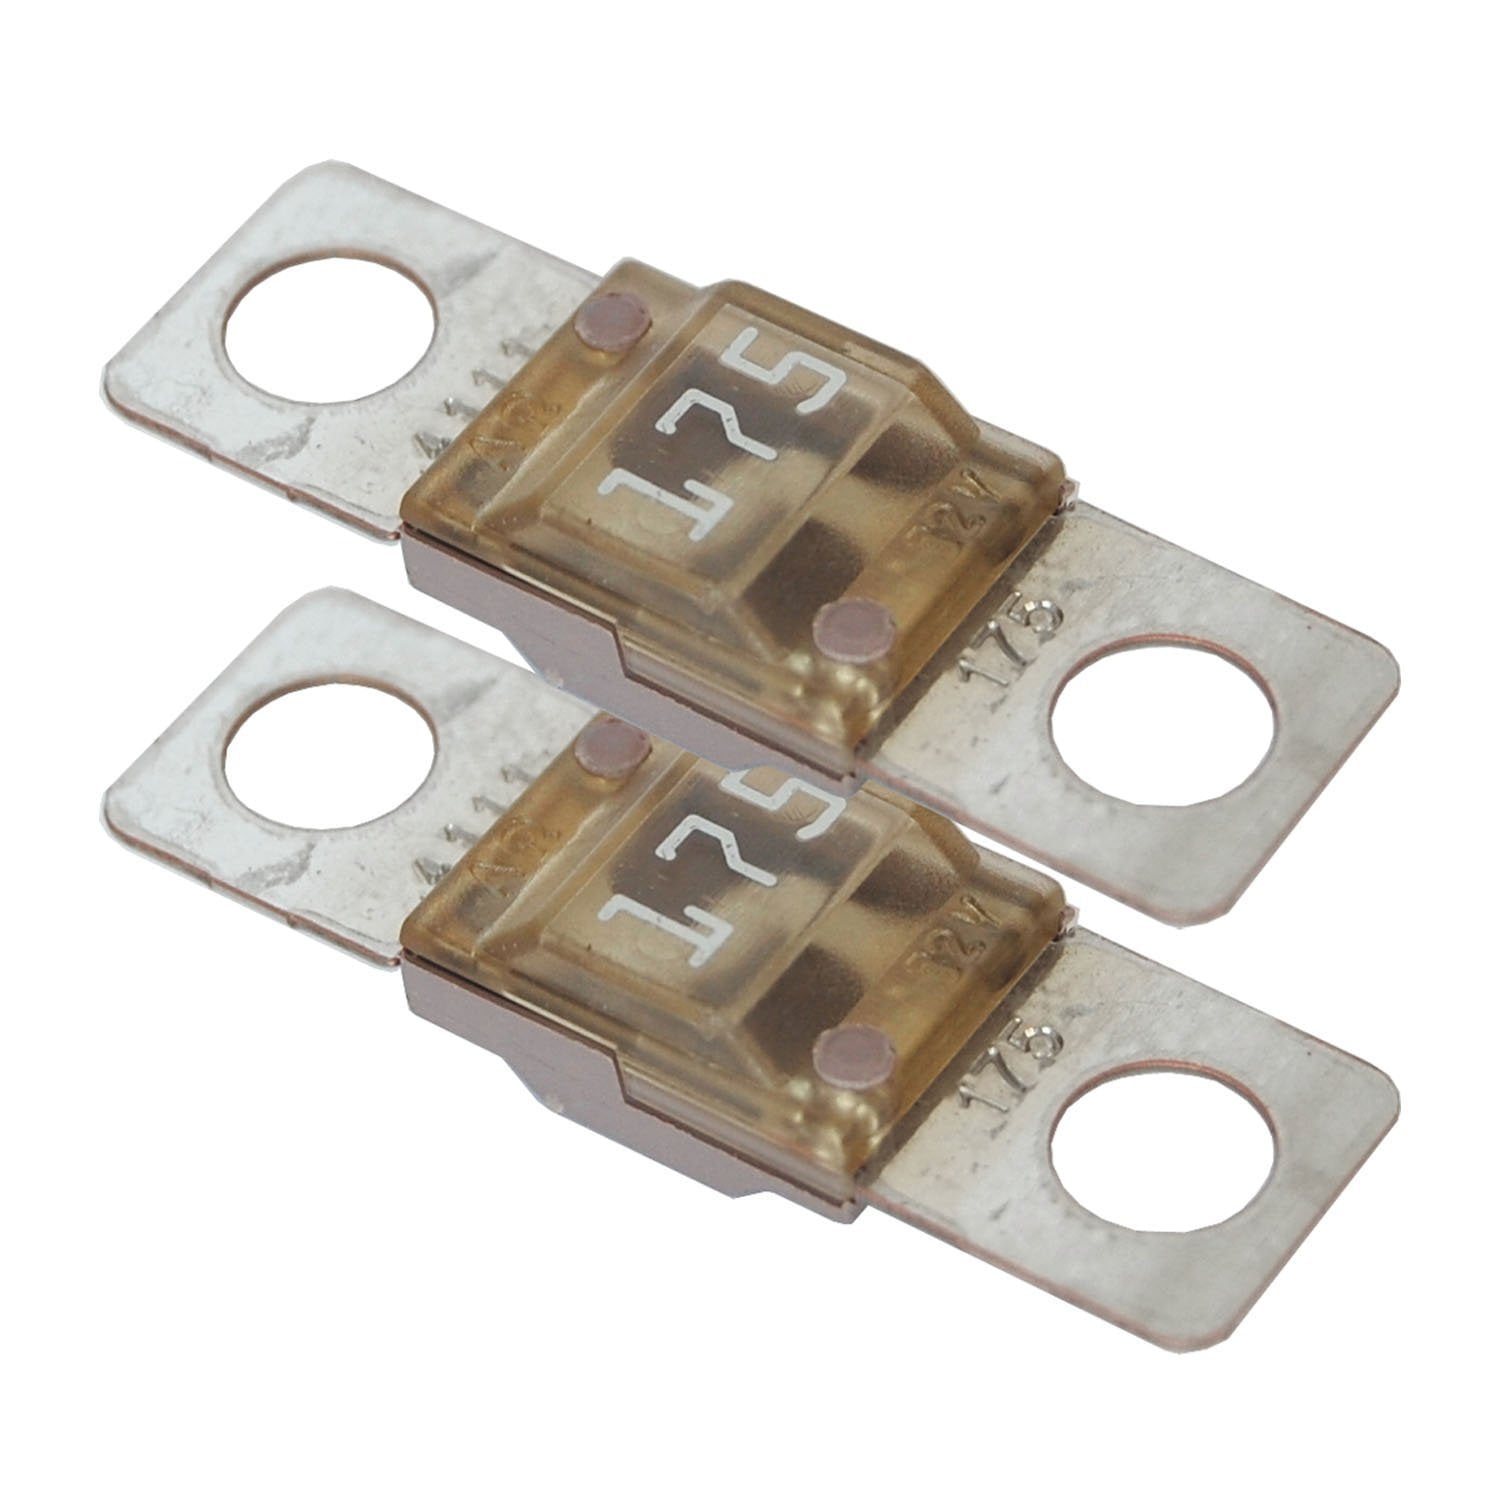 ANL FUSES 175 AMP FUSE BLOCK FUSE GOLD PLATED 175A PRO 